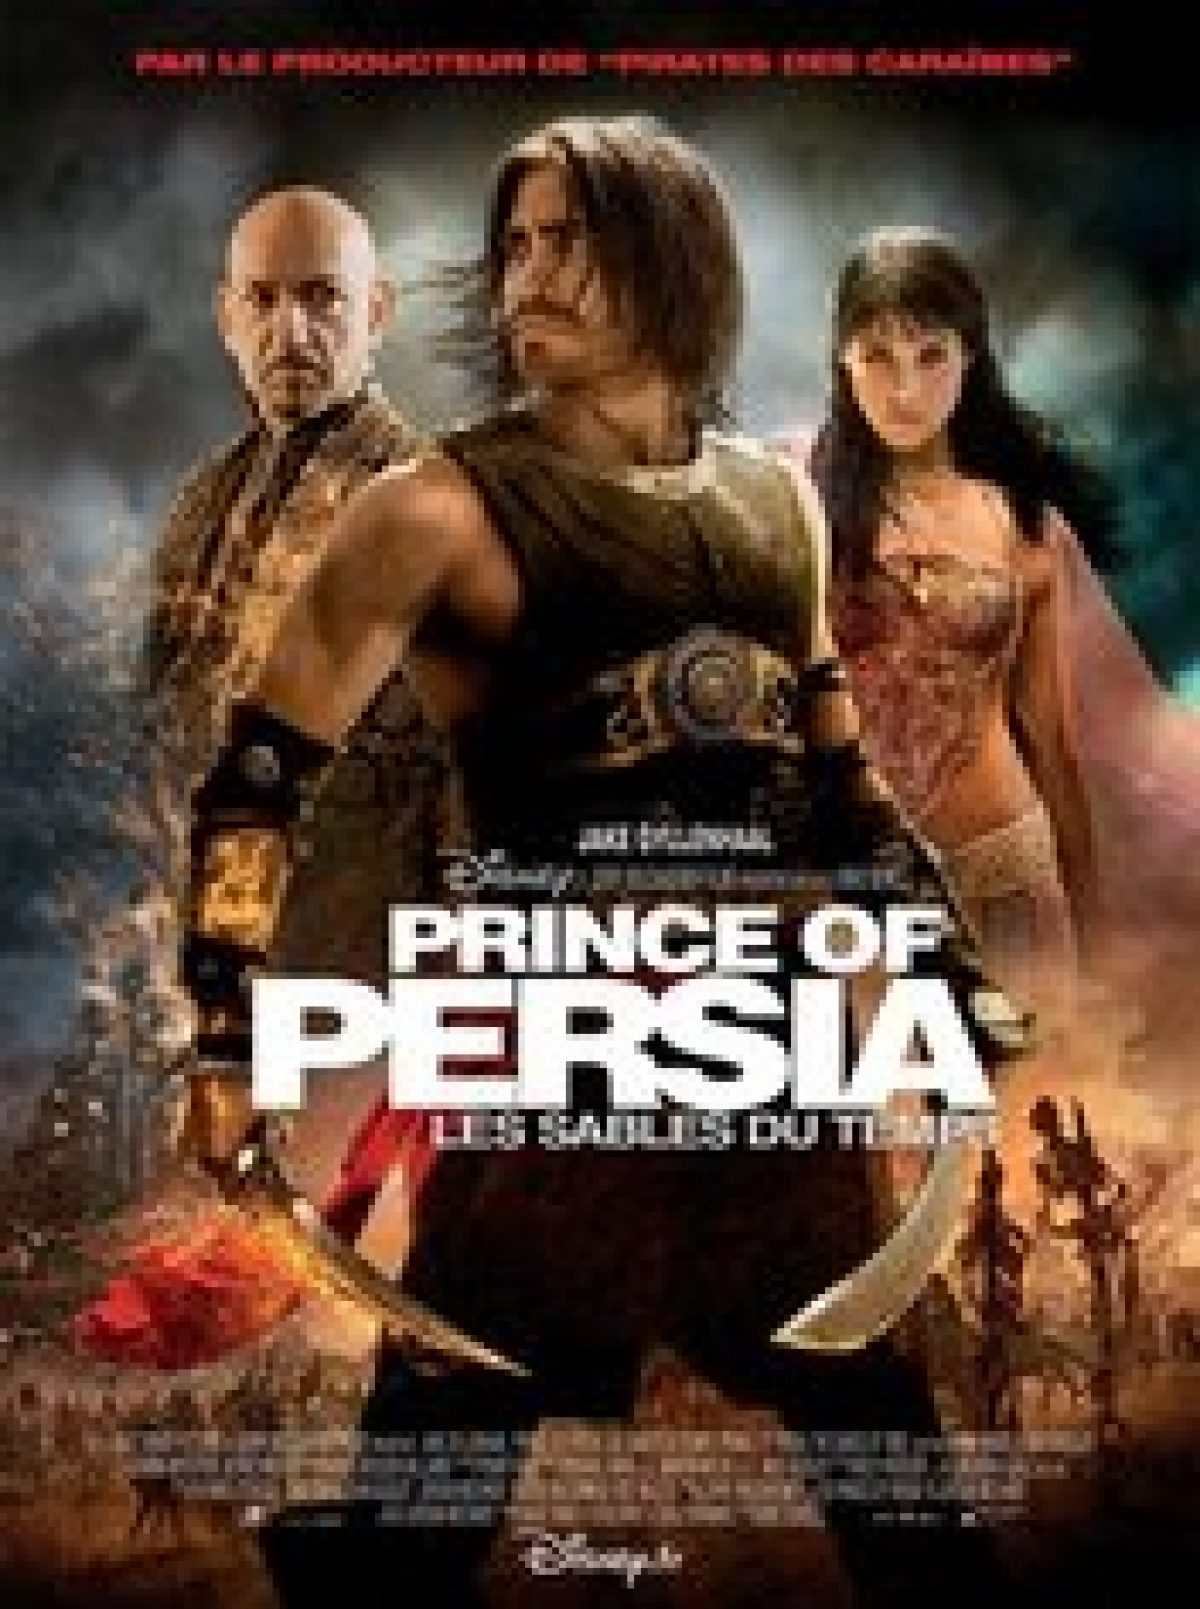 [Film] Prince of Persia : The Sands of Time, sur M6